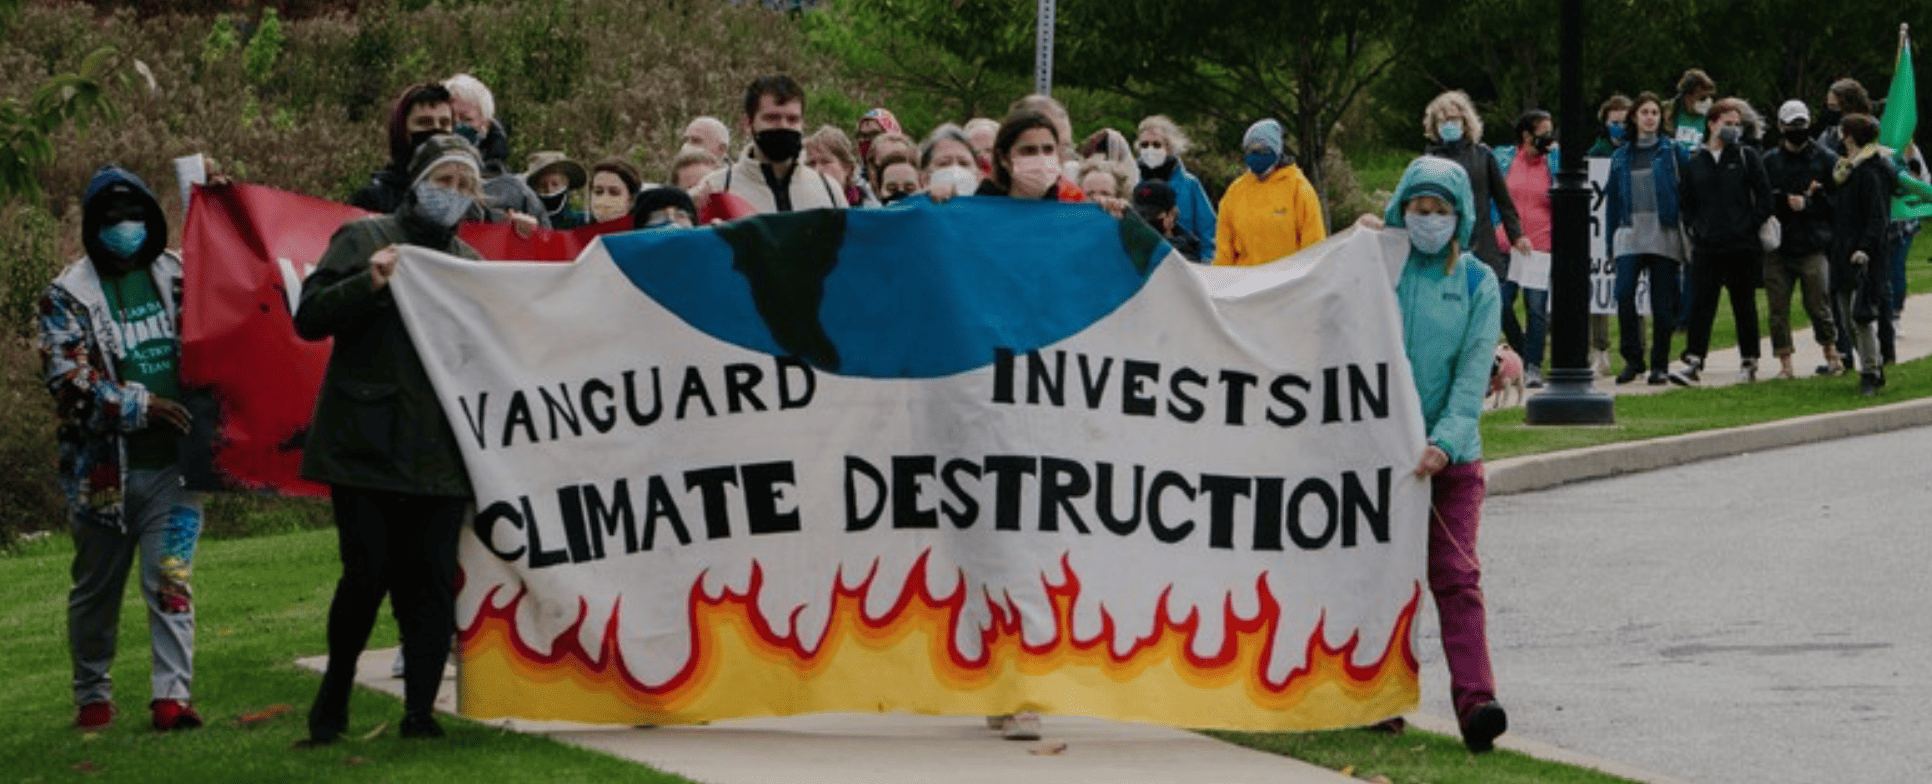 Group of people walk behind a banner that reads, "Vanguard invests in climate destruction"